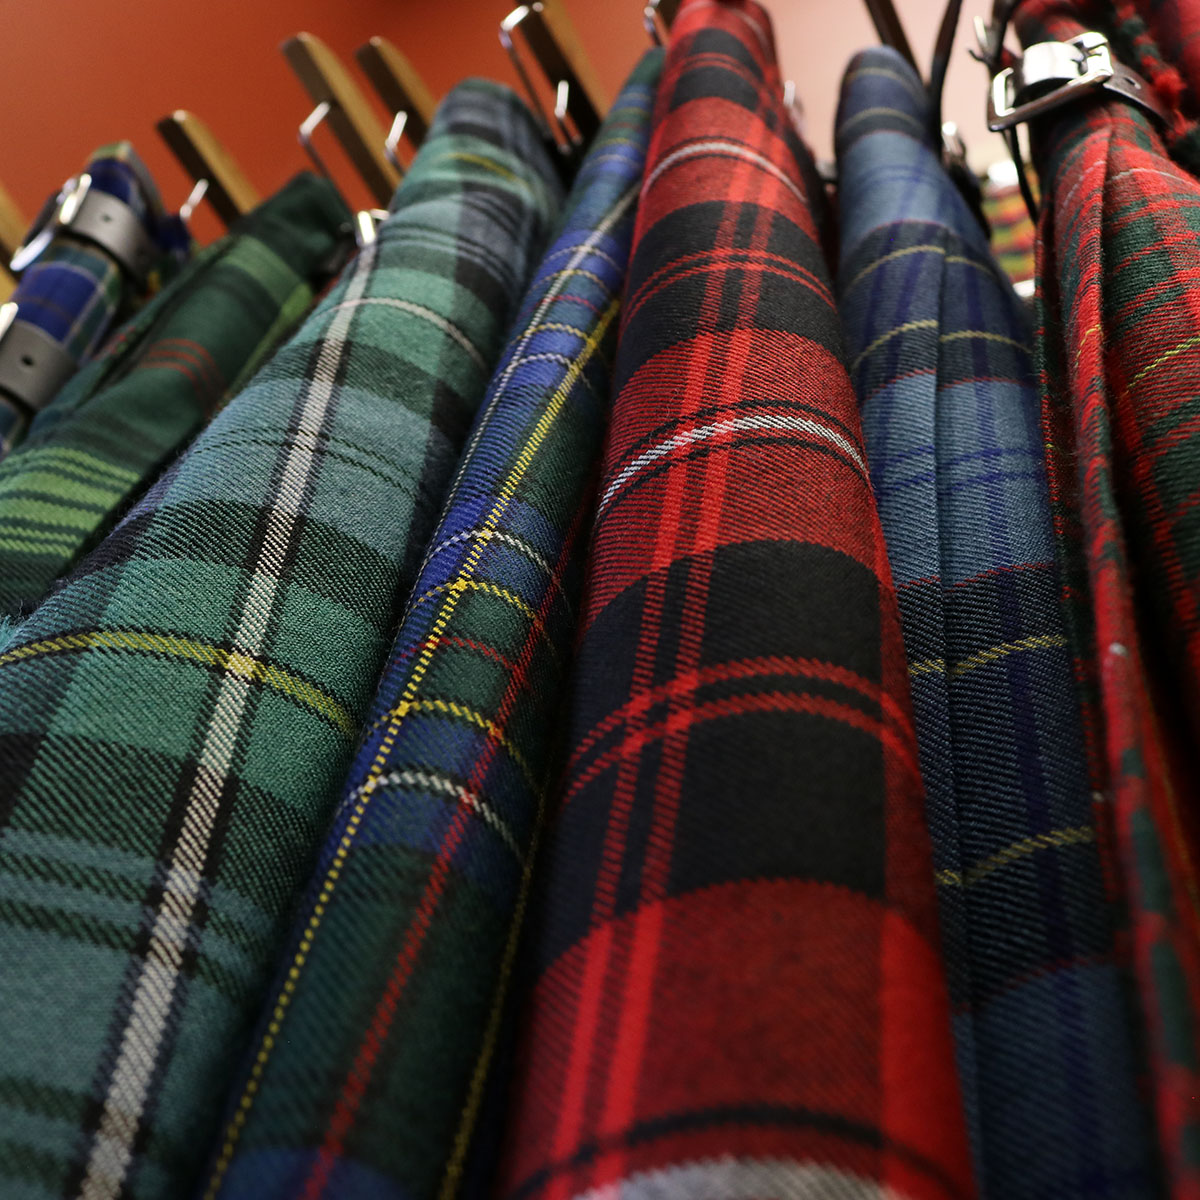 What's the difference between tartan and plaid? Bet you don't know